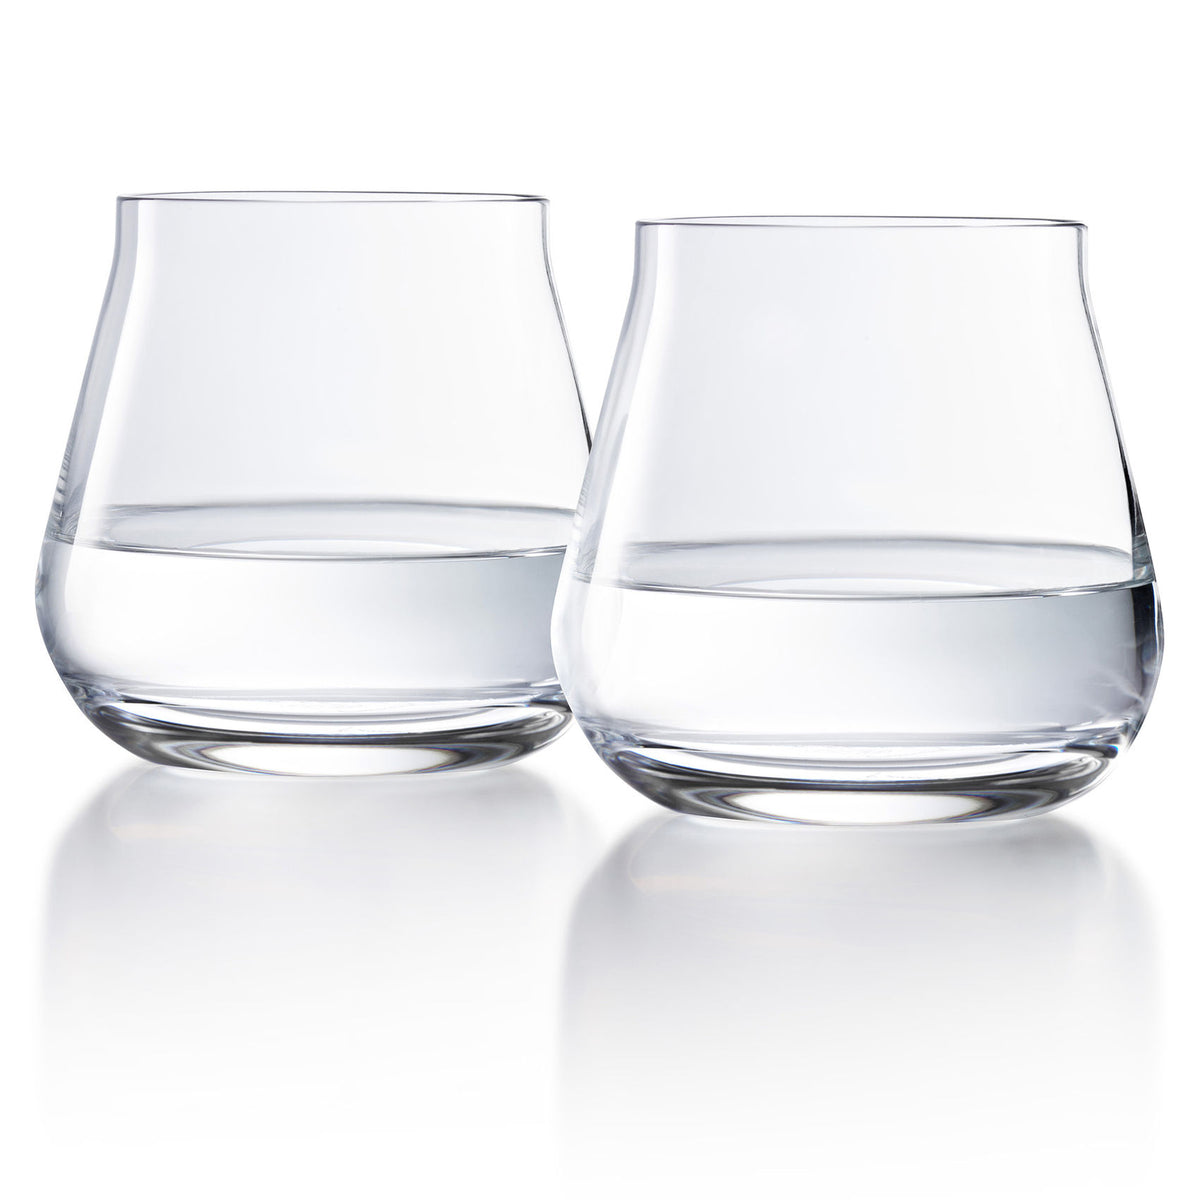 Double Old Fashioned Chateau Baccarat Tumblers, Set of 2